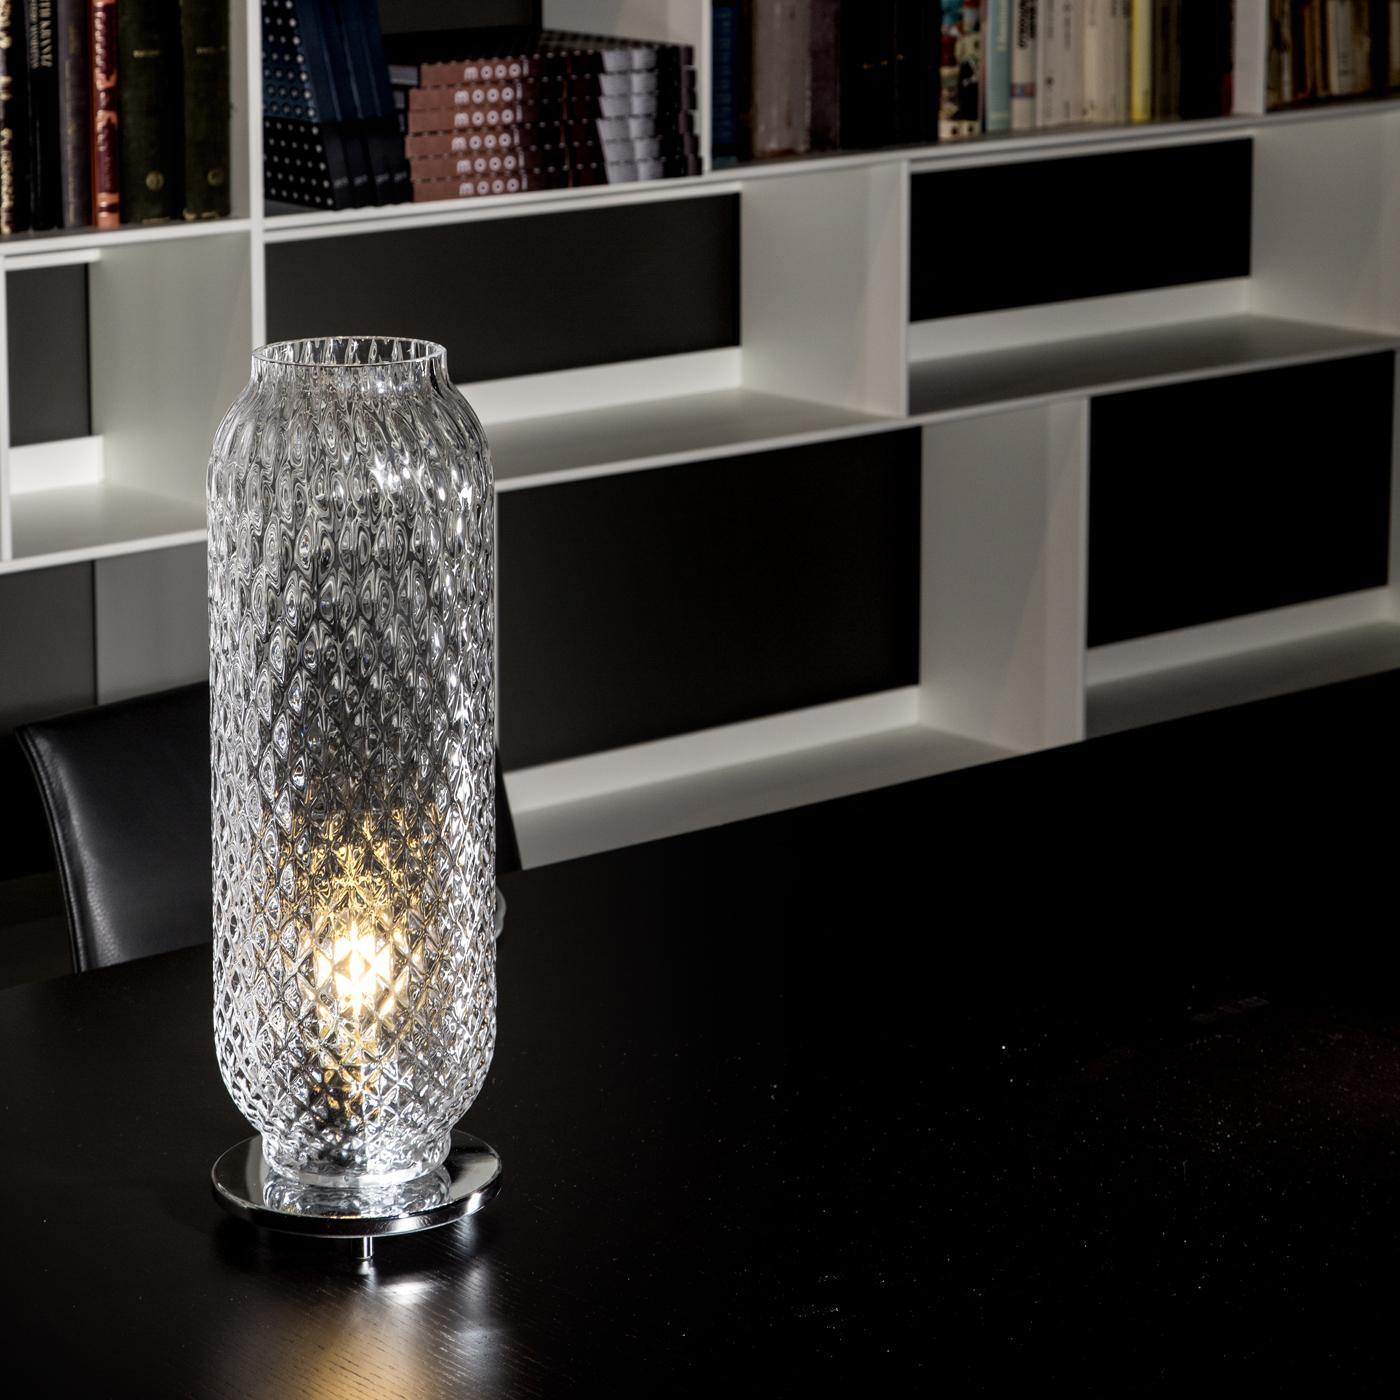 This elegant table lamp of the Lumè Collection transforms a Murano glass vase in a refined, timeless design. The clear blown glass diffuser has a cylindrical shape open on top and rests on a round polished chrome metal base. The exquisite bubbled